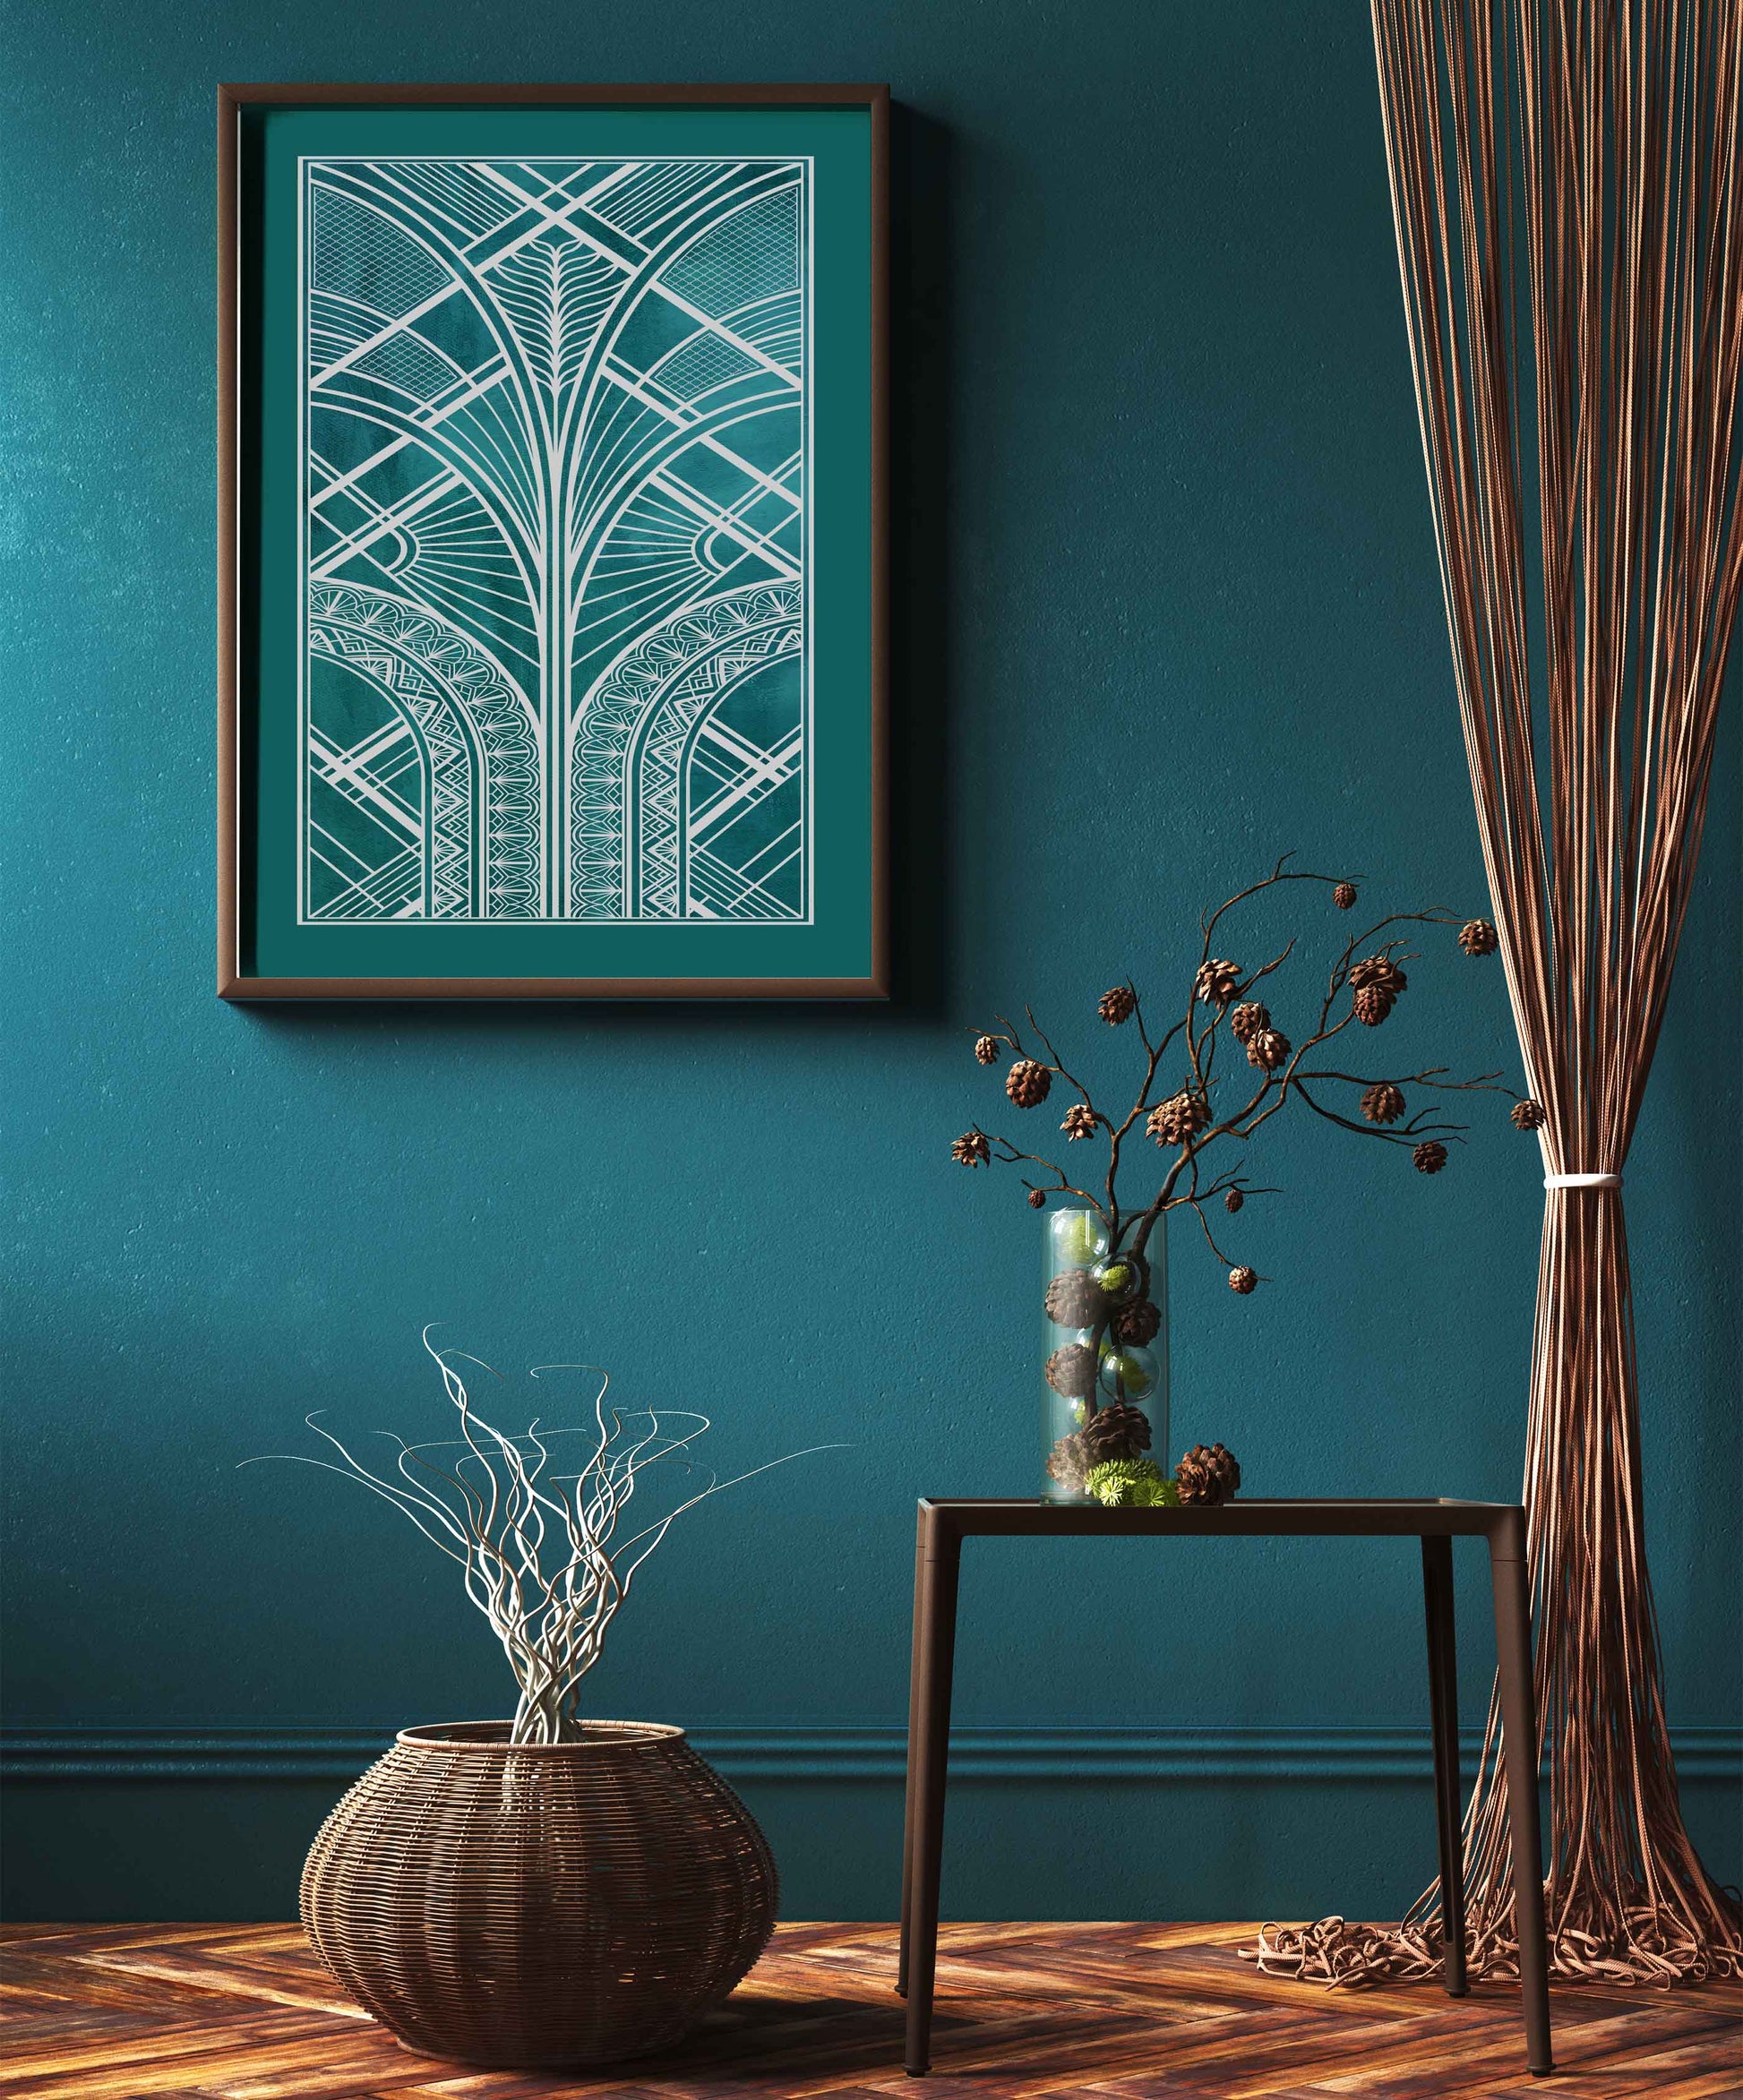 Art deco print in teal and silver